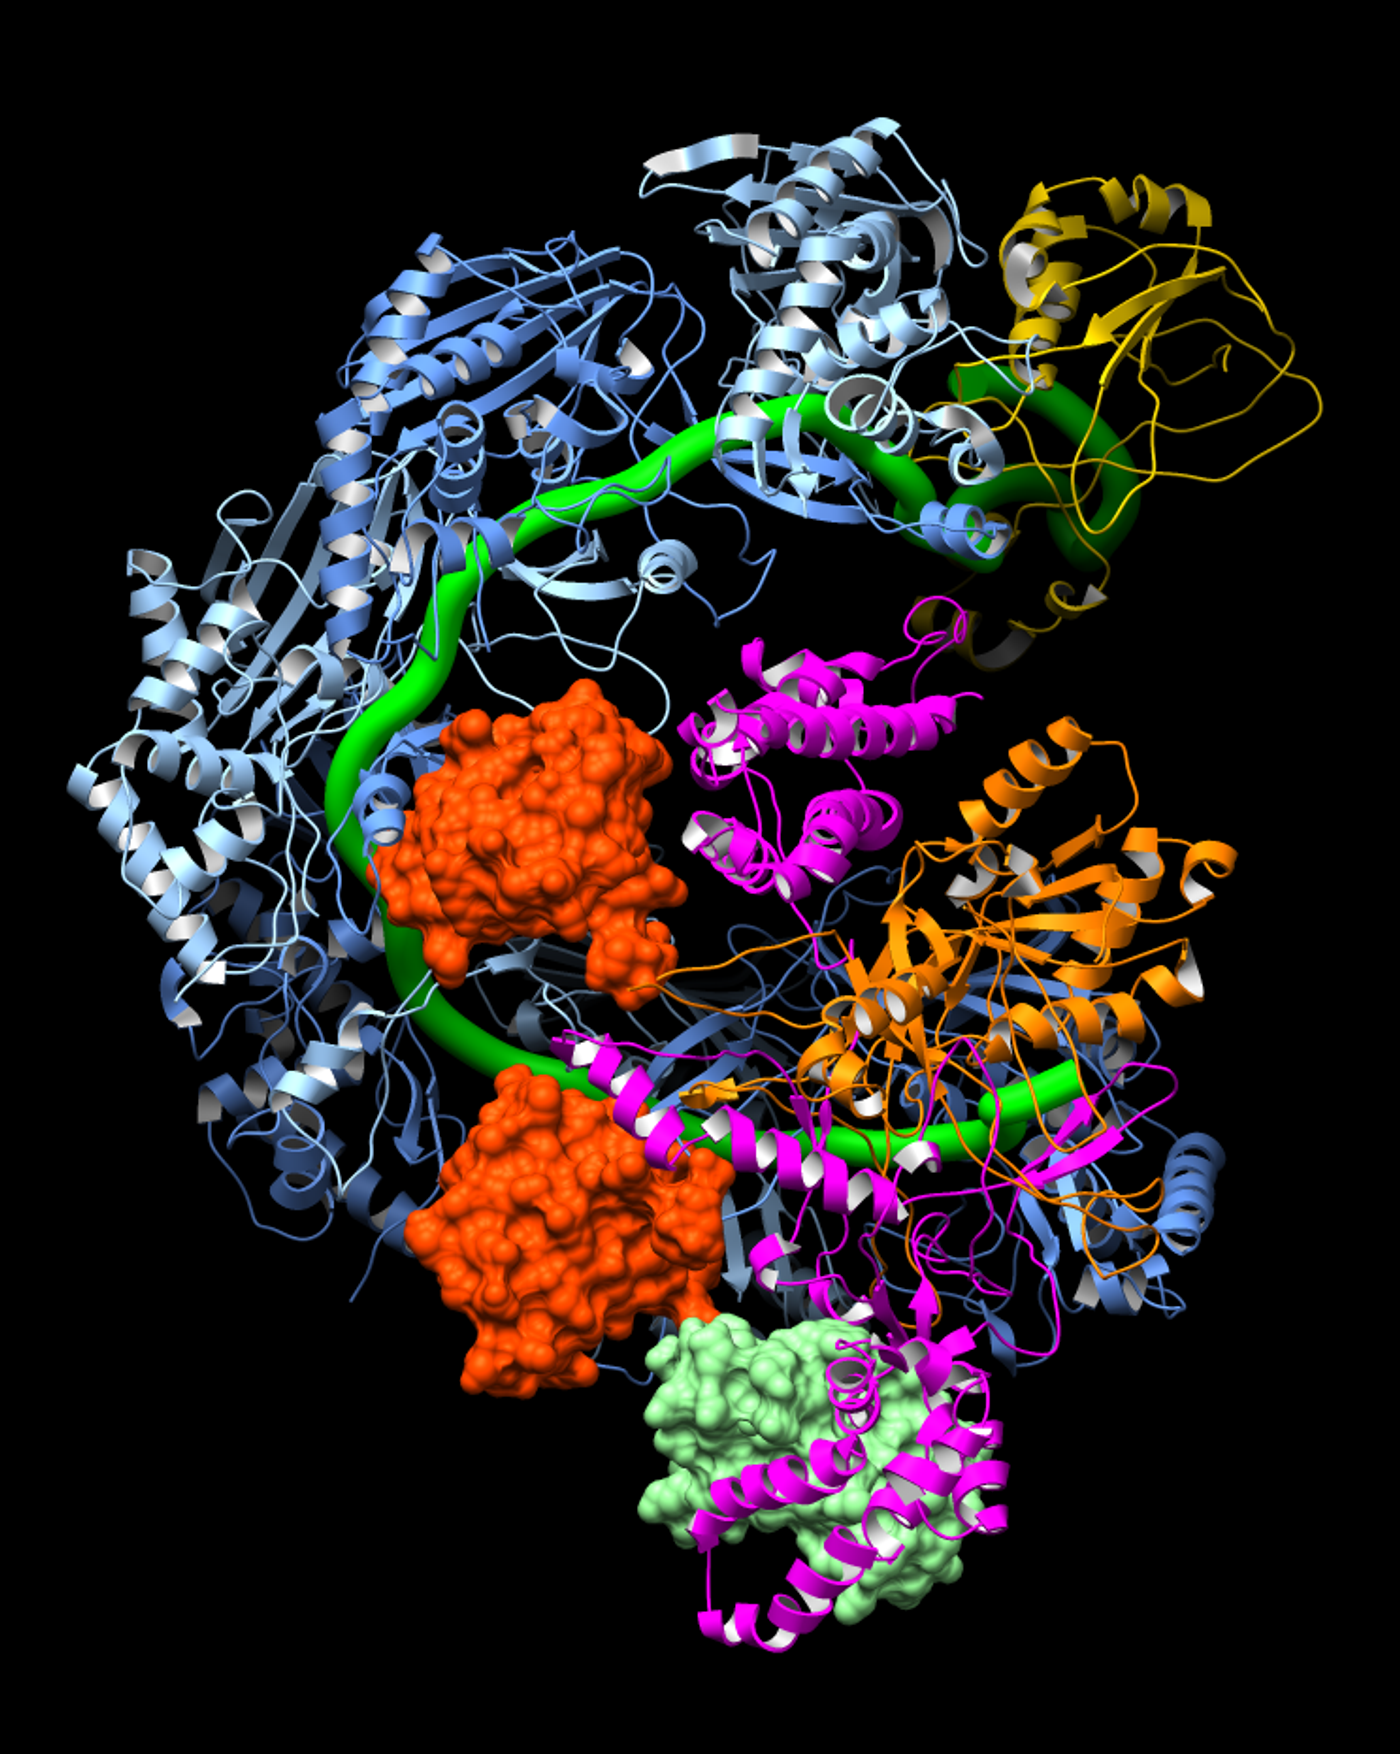 This image shows how the CRISPR surveillance complex is disabled by two copies of anti-CRISPR protein AcrF1 (red) and one AcrF2 (light green). These anti-CRISPRs block access to the CRISPR RNA (green tube) preventing the surveillance complex from scanning and targeting invading viral DNA for destruction (Image from Lander Lab).